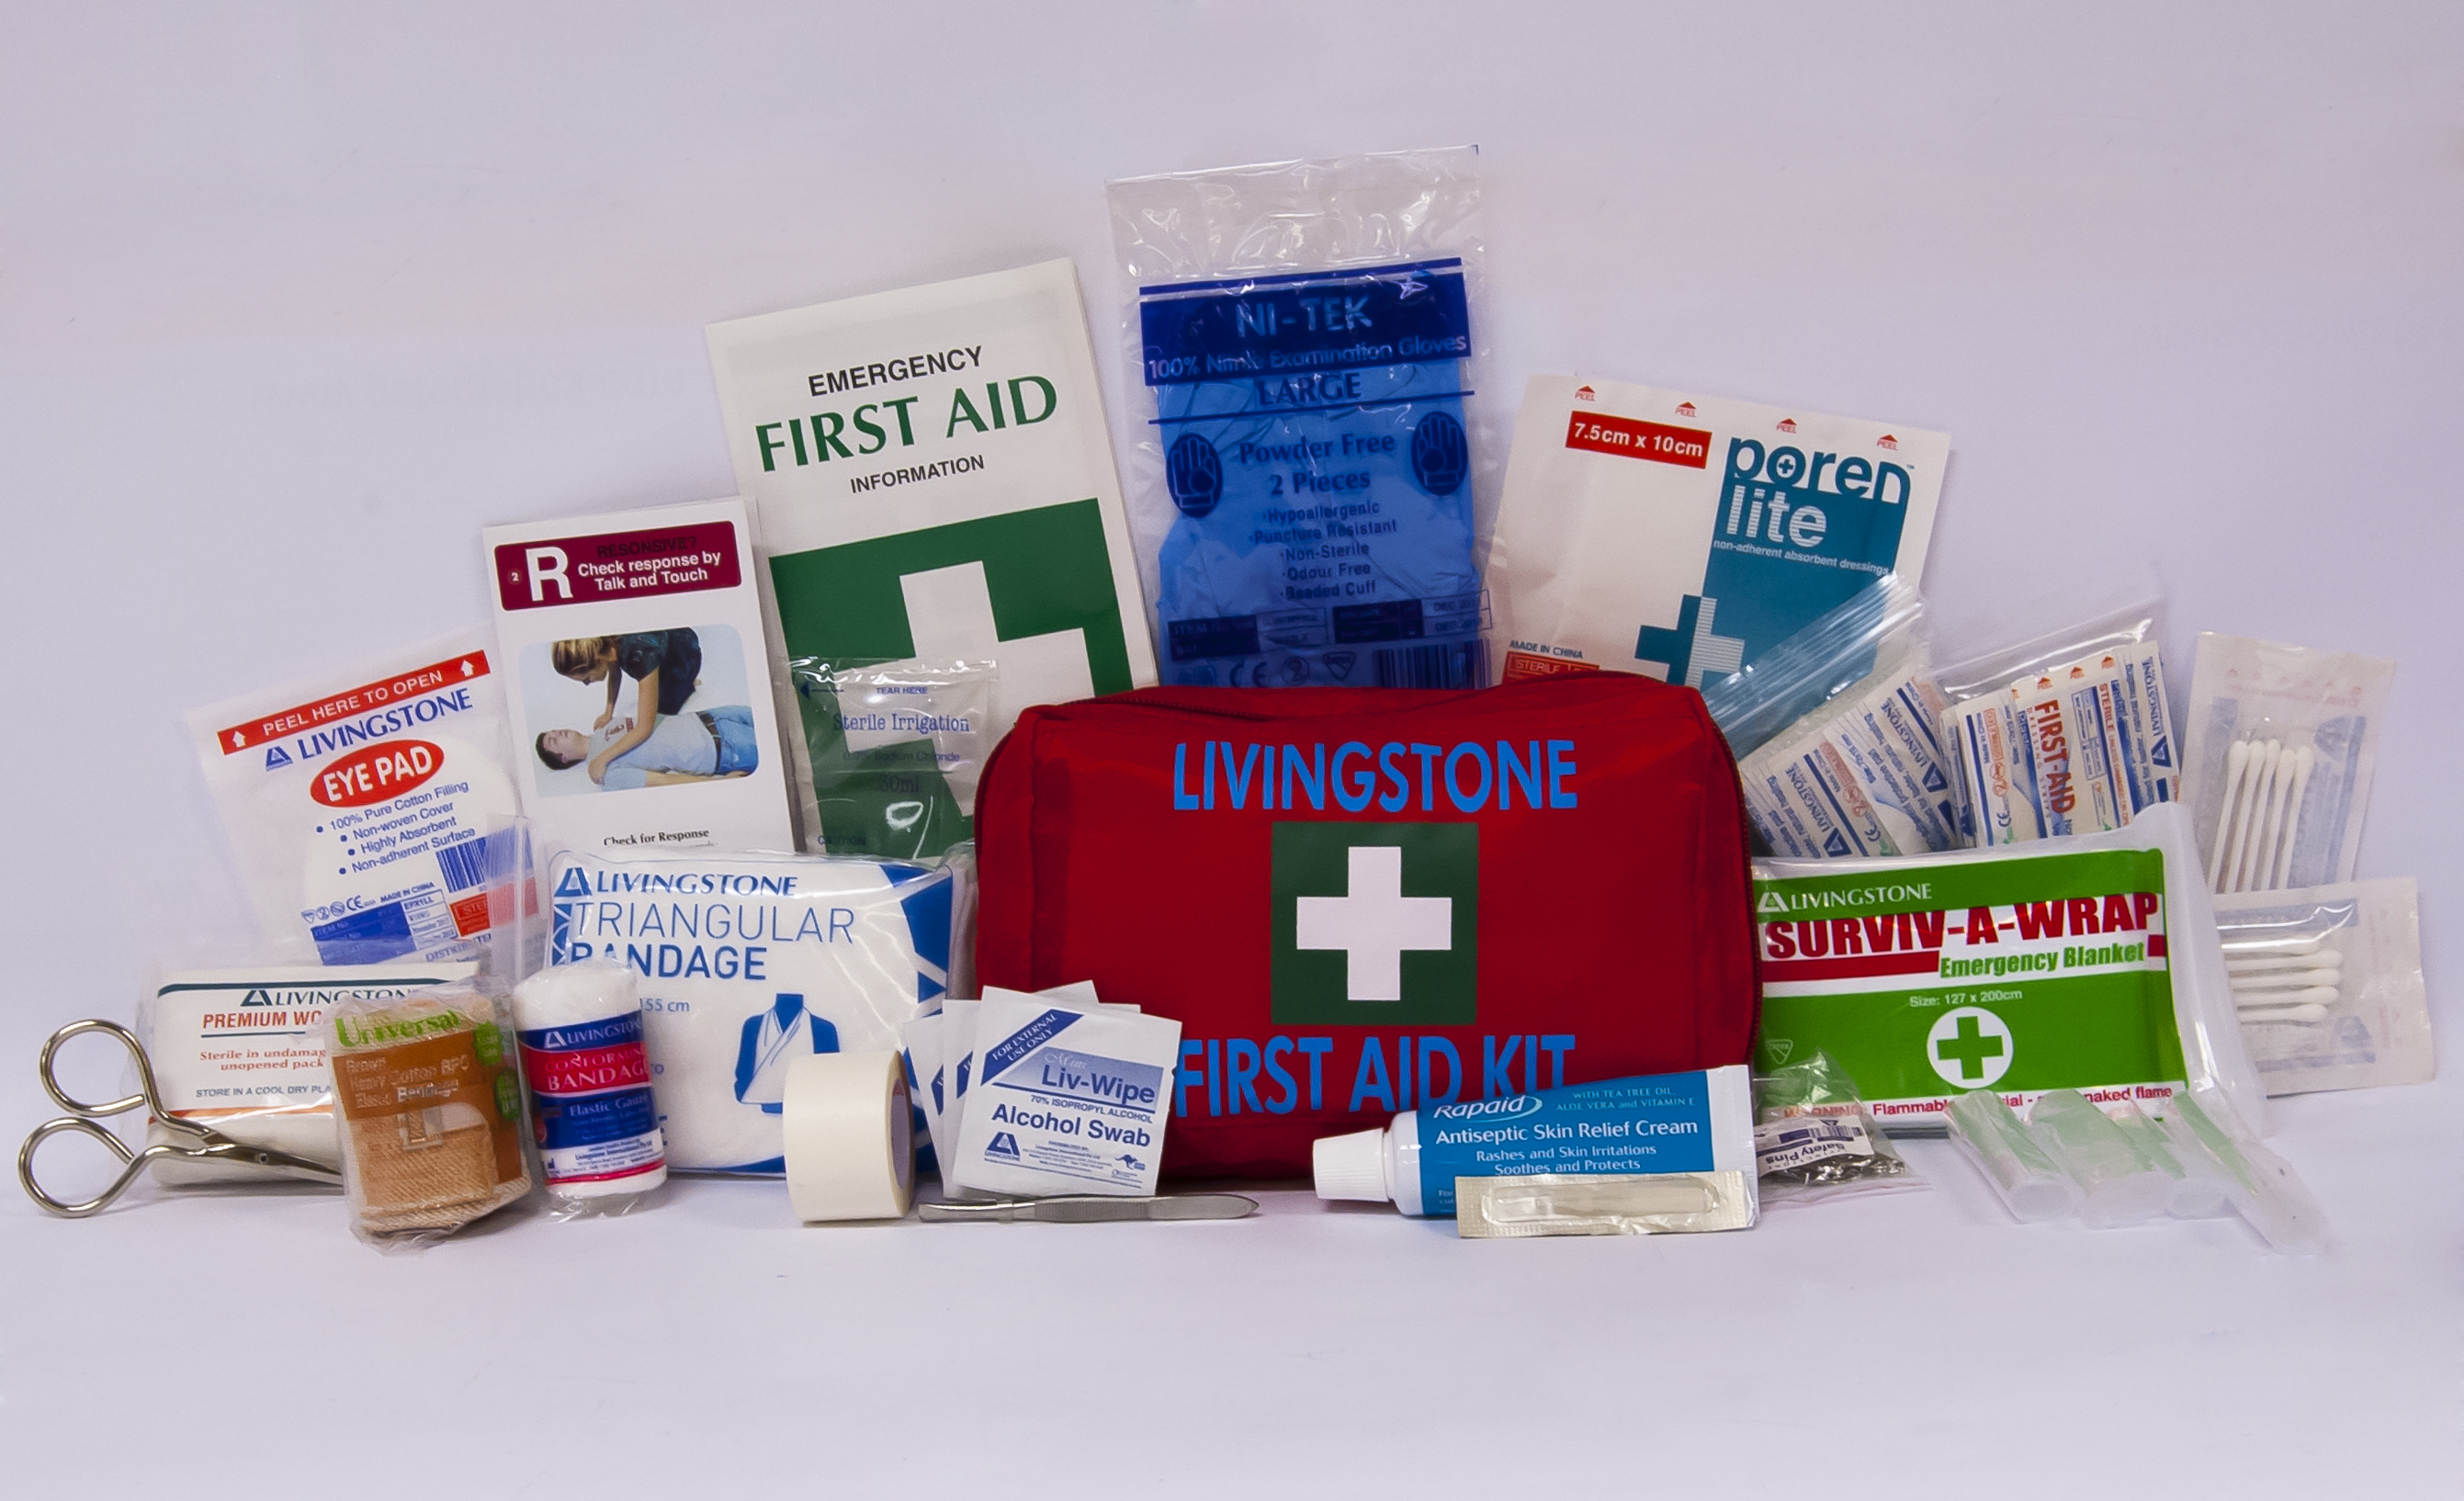 Livingstone Work Vehicle First Aid Kit, Small, 18 x 11 x 7cm Pouch, Red, Complete Set In Nylon Pouch